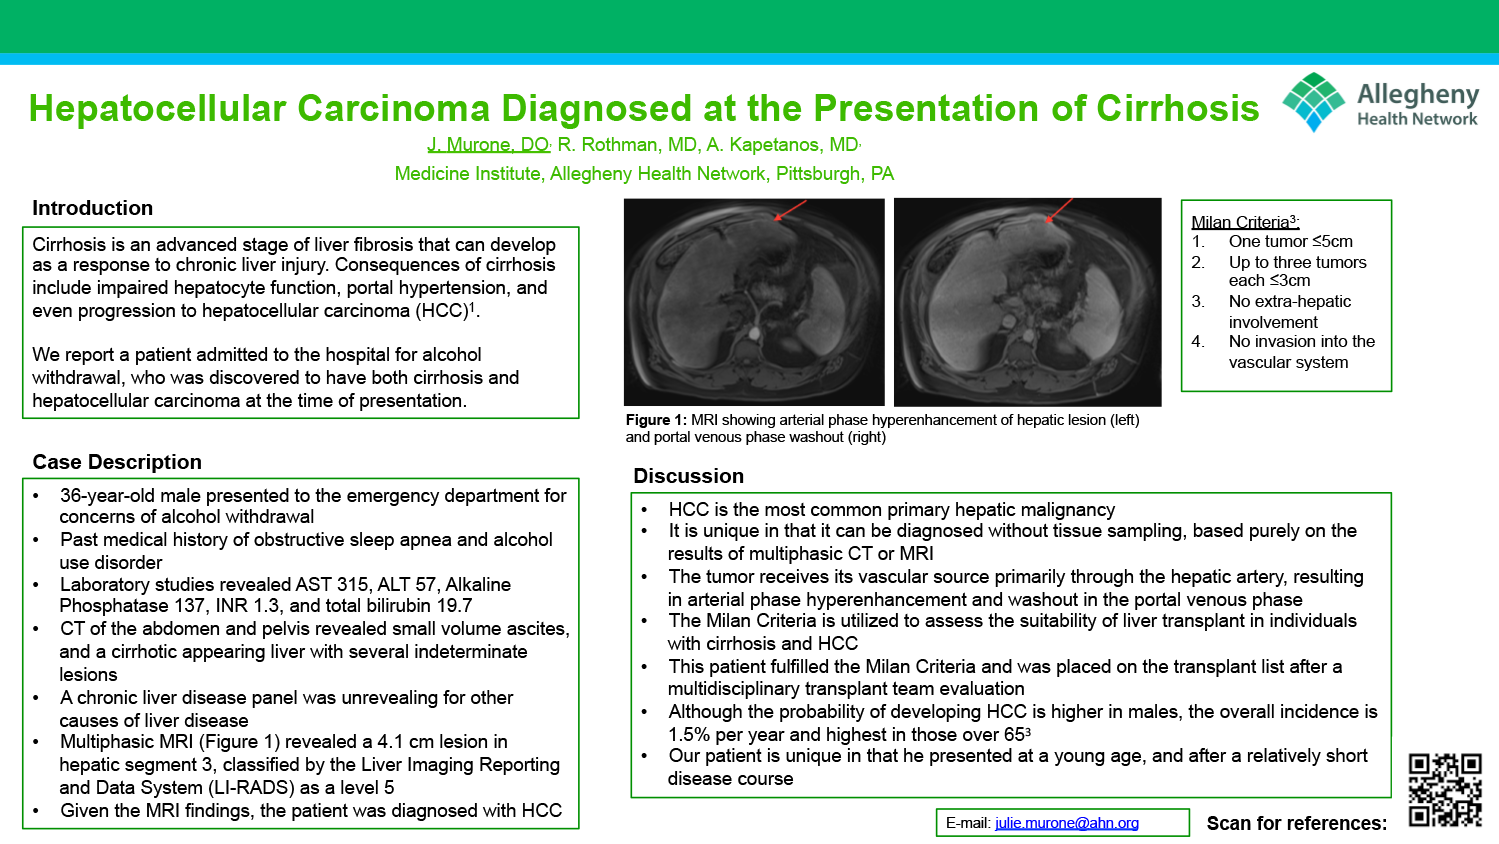 Julie Murone - PAW-23-Hepatocellular-Carcinoma-Diagnosed-at-the-Presentation-of-Cirrhosis